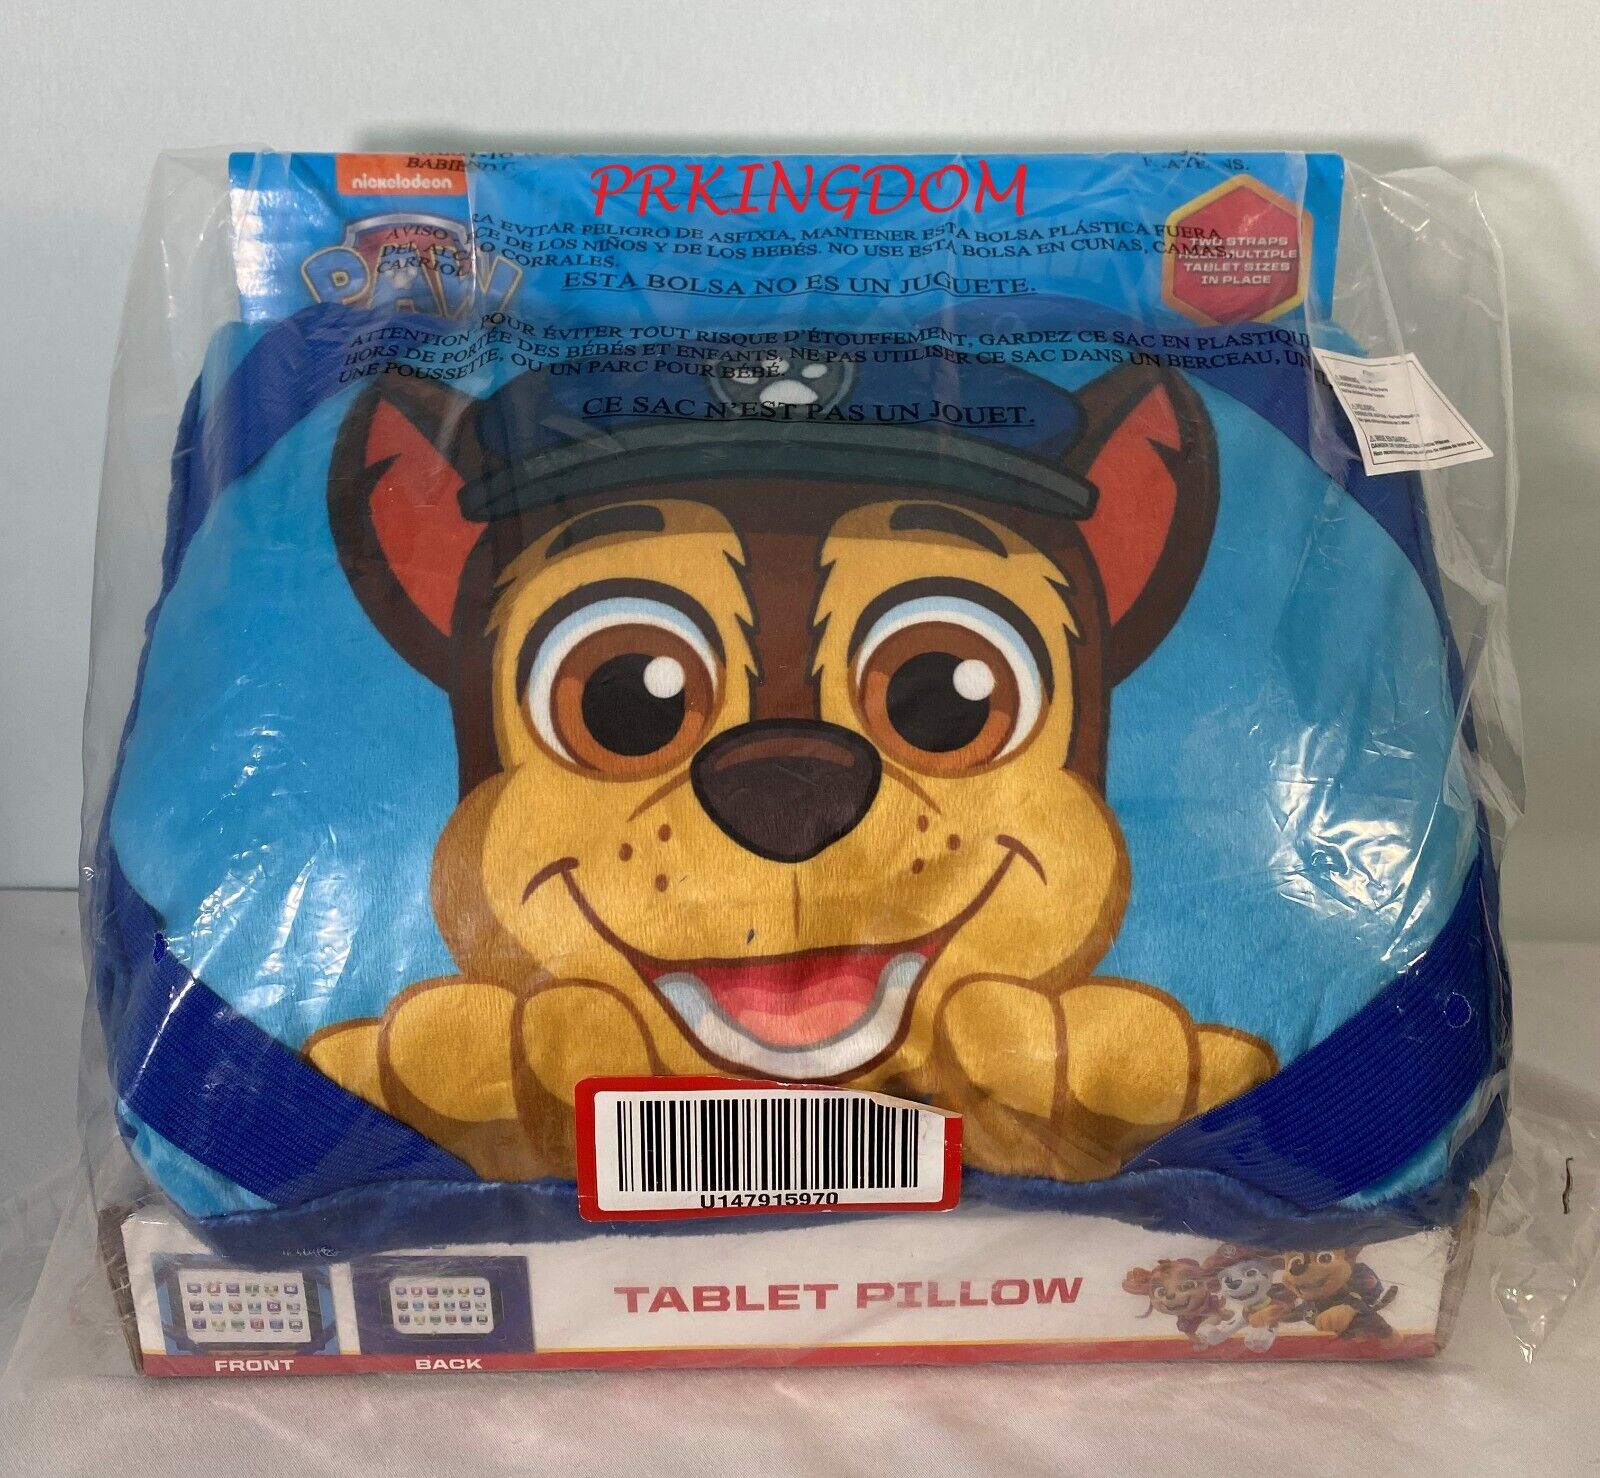 Nickelodeon Paw Patrol Chase Tablet Holder Pillow Brand New